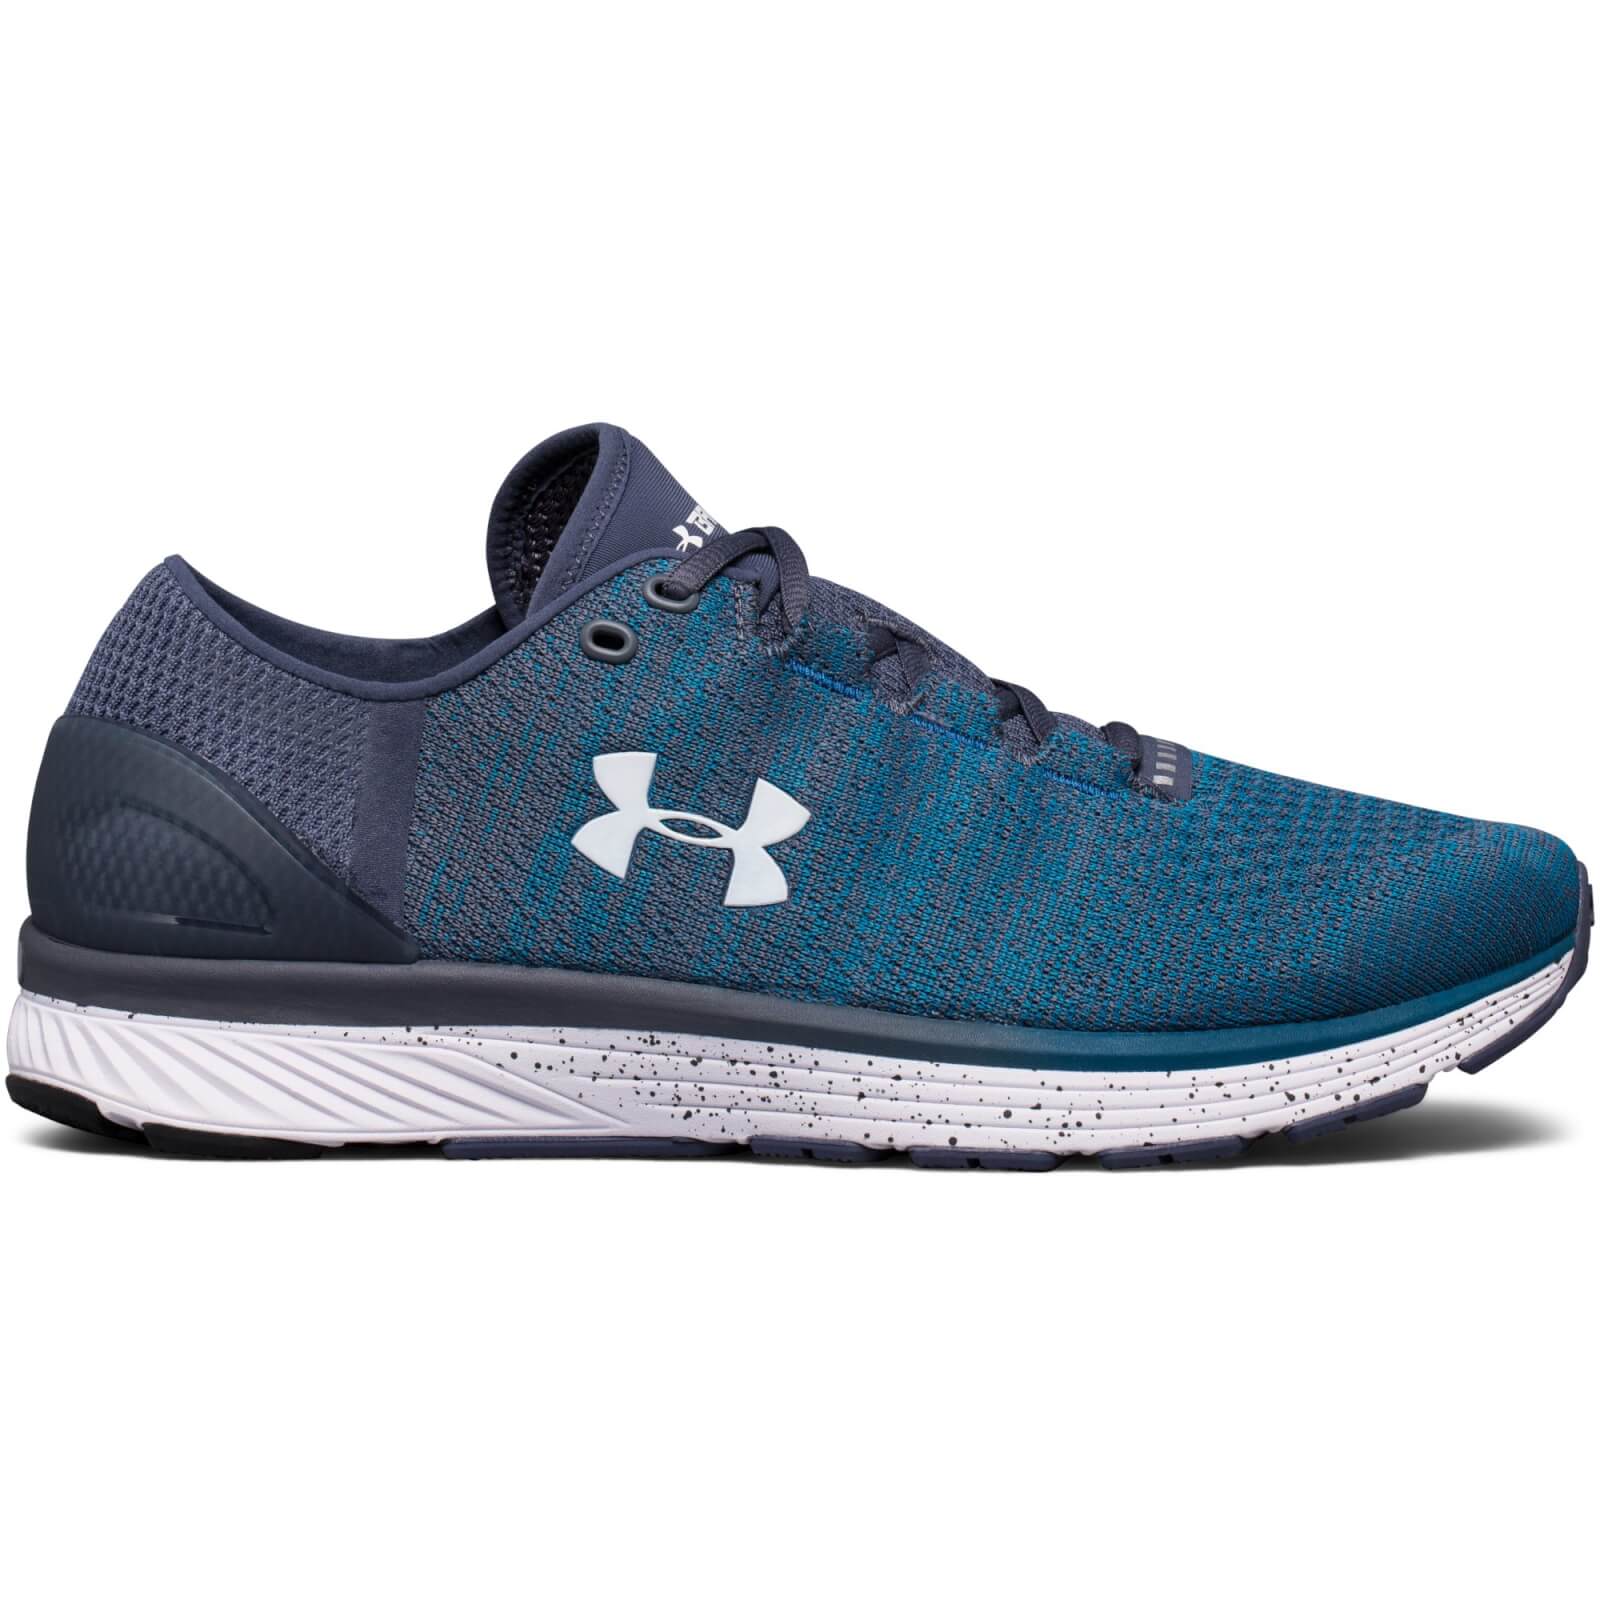 under armour men's charged bandit 3